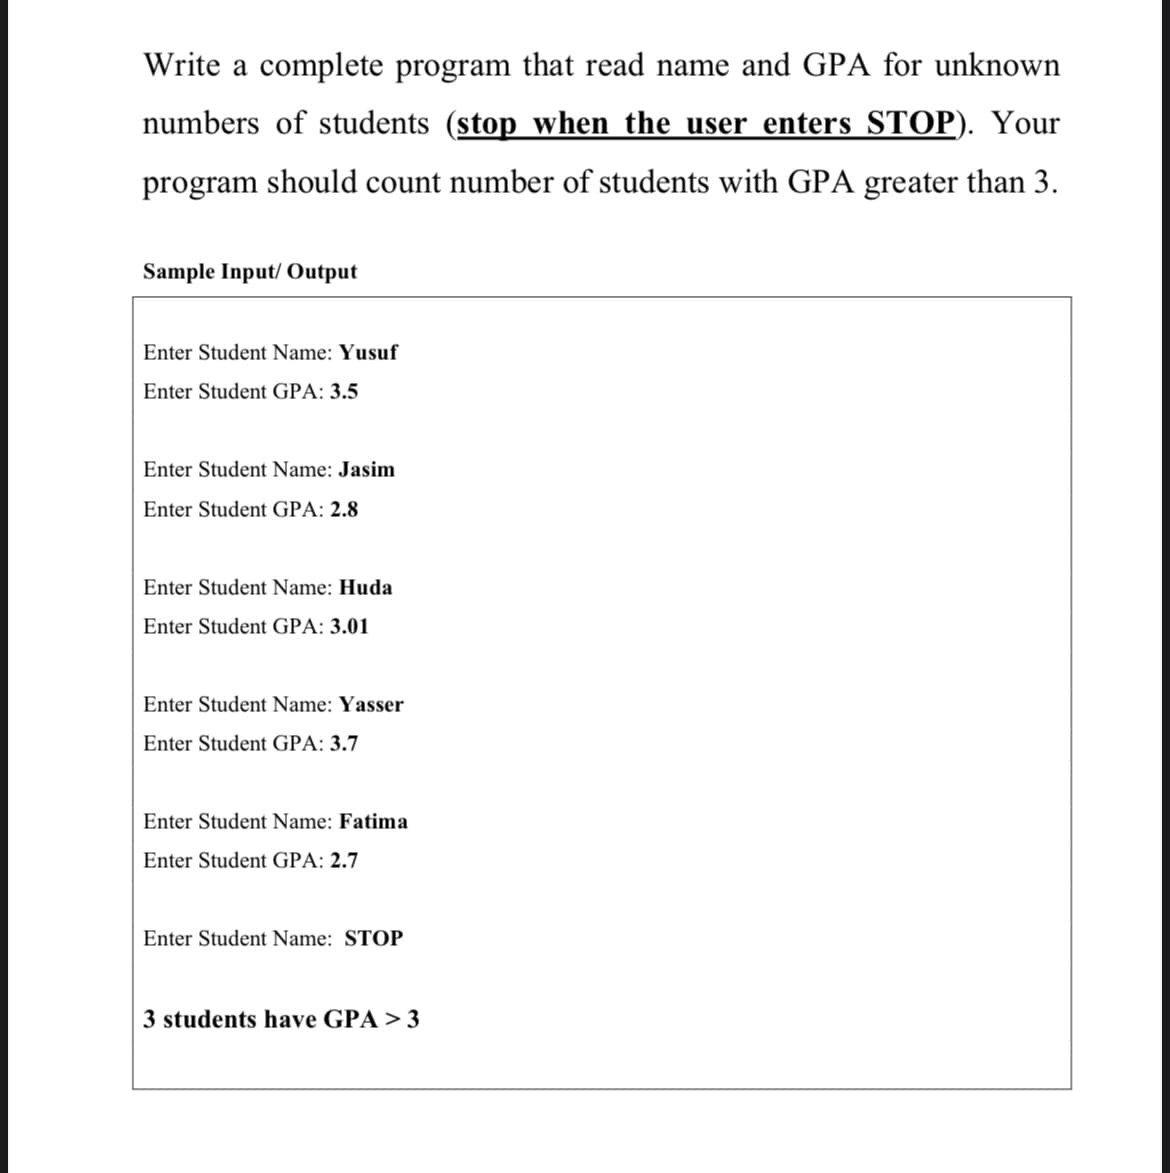 Write a complete program that read name and GPA for unknown
numbers of students (stop when the user enters STOP). Your
program should count number of students with GPA greater than 3.
Sample Input/Output
Enter Student Name: Yusuf
Enter Student GPA: 3.5
Enter Student Name: Jasim
Enter Student GPA: 2.8
Enter Student Name: Huda
Enter Student GPA: 3.01
Enter Student Name: Yasser
Enter Student GPA: 3.7
Enter Student Name: Fatima
Enter Student GPA: 2.7
Enter Student Name: STOP
3 students have GPA > 3